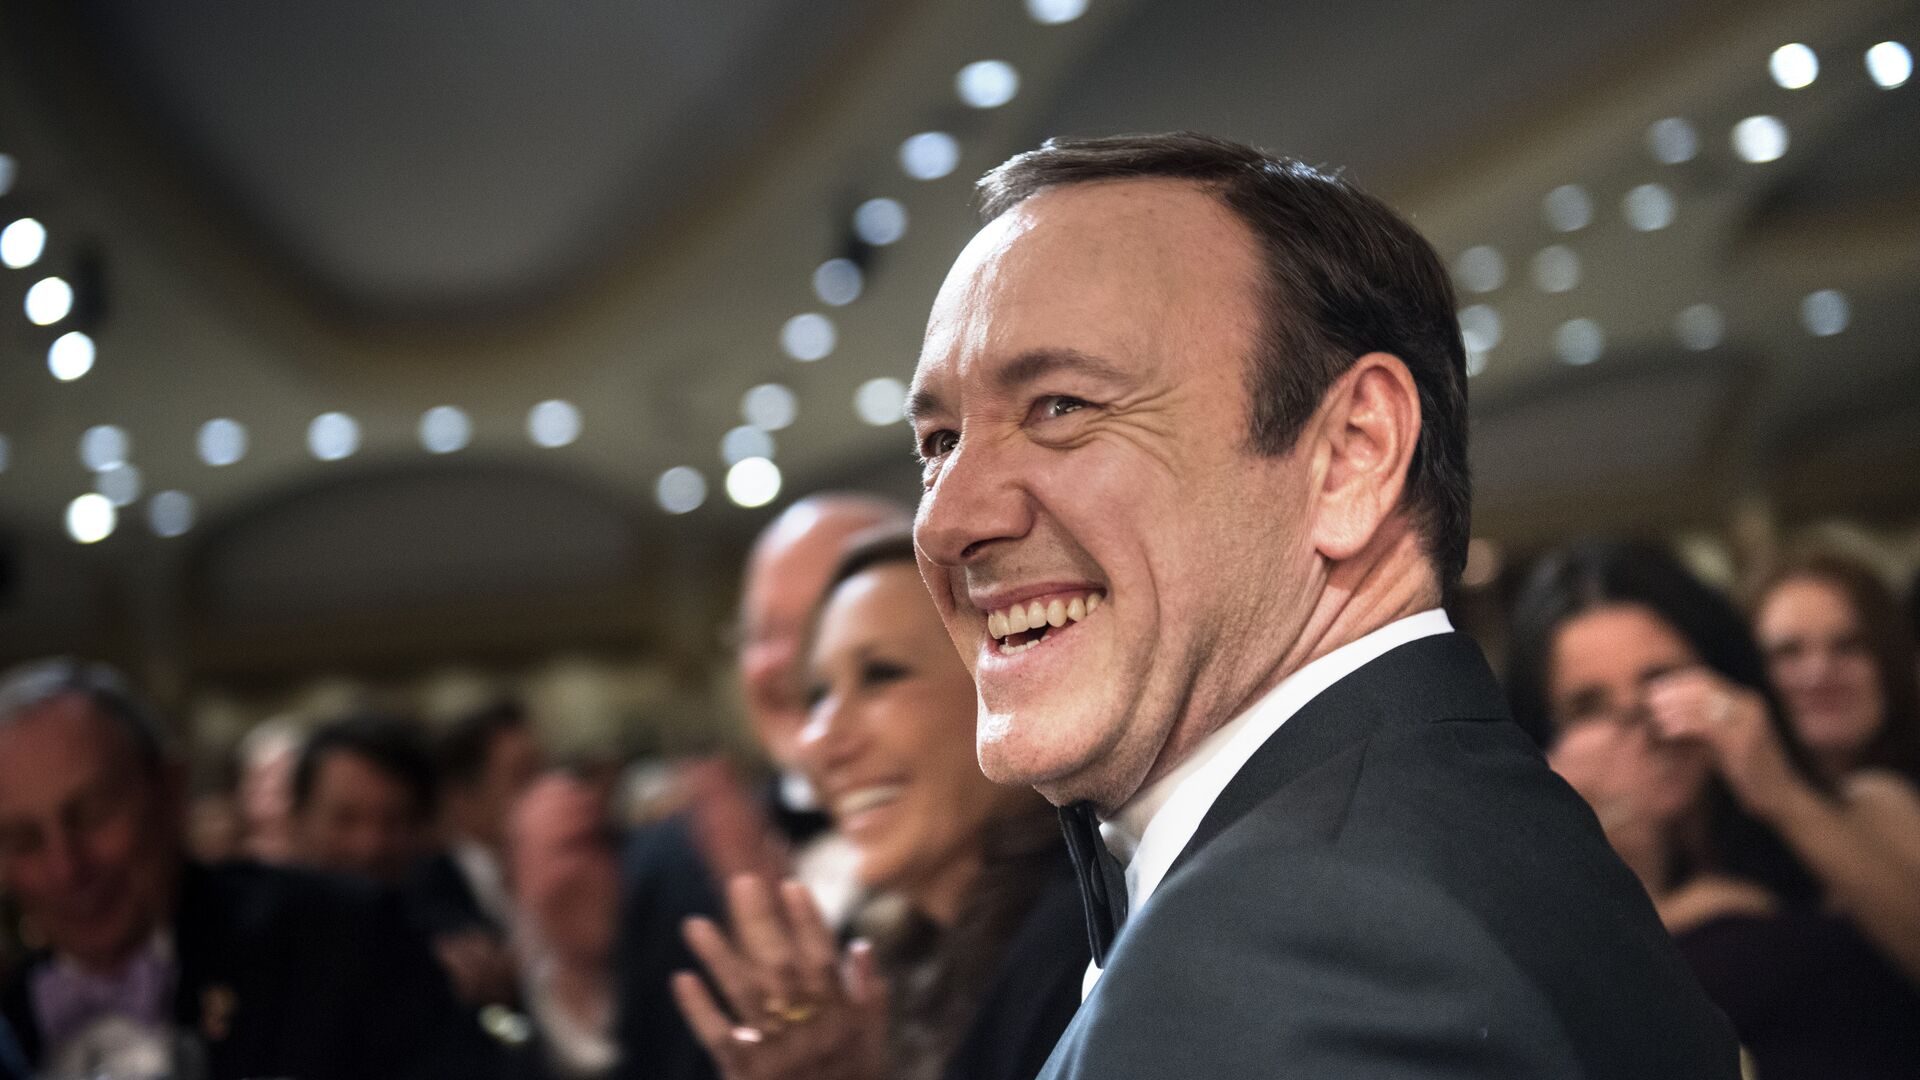 Actor Kevin Spacey laughs during the White House Correspondents’ Association Dinner April 27, 2013 in Washington, DC. Obama attended the yearly dinner which is attended by journalists, celebrities and politicians. - Sputnik Mundo, 1920, 23.05.2021